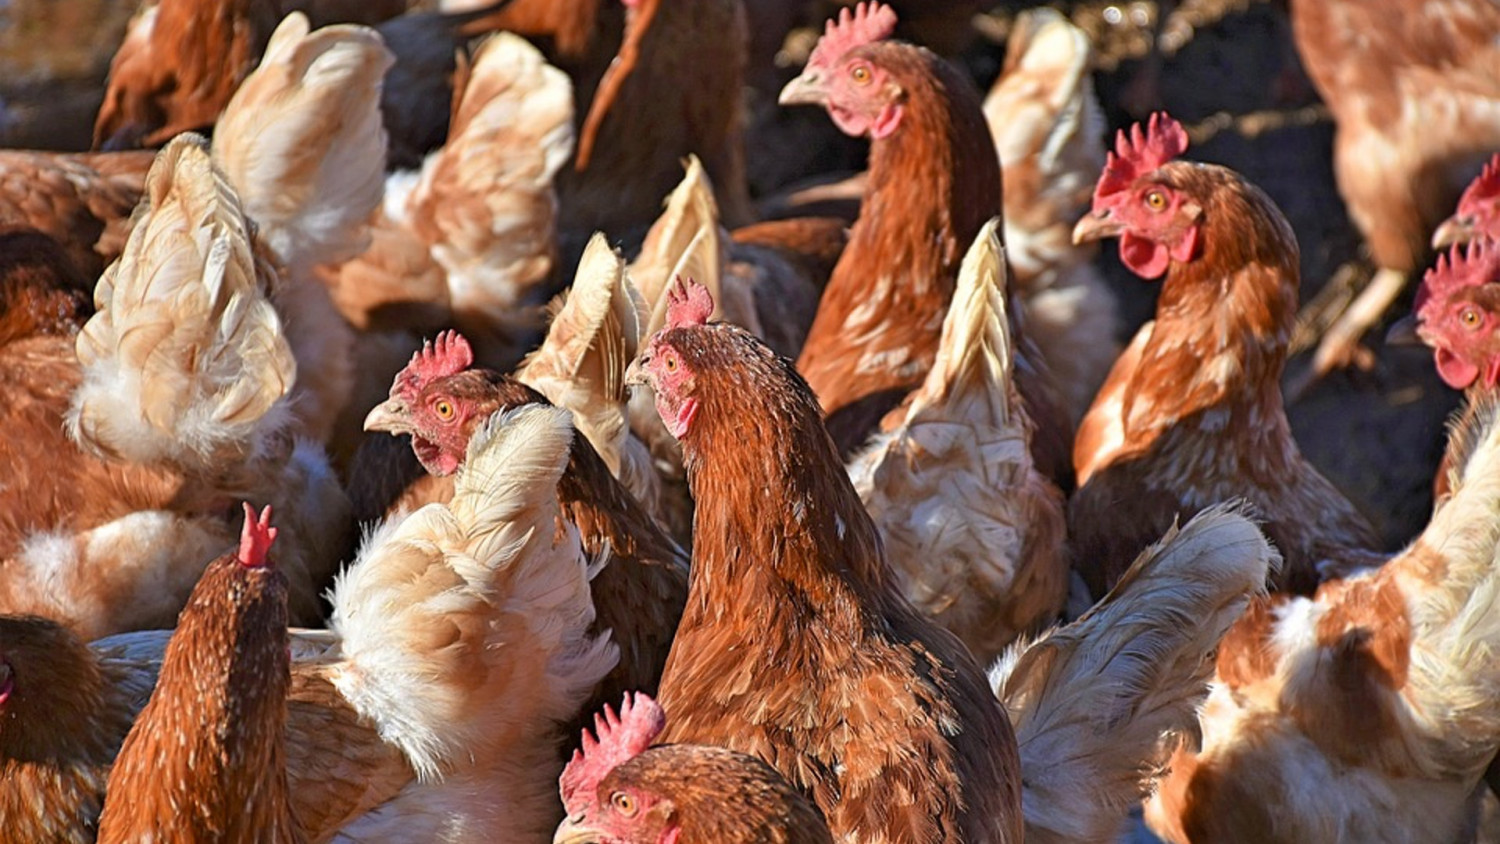 China Lifts Restrictions on Imports of US Poultry: Customs